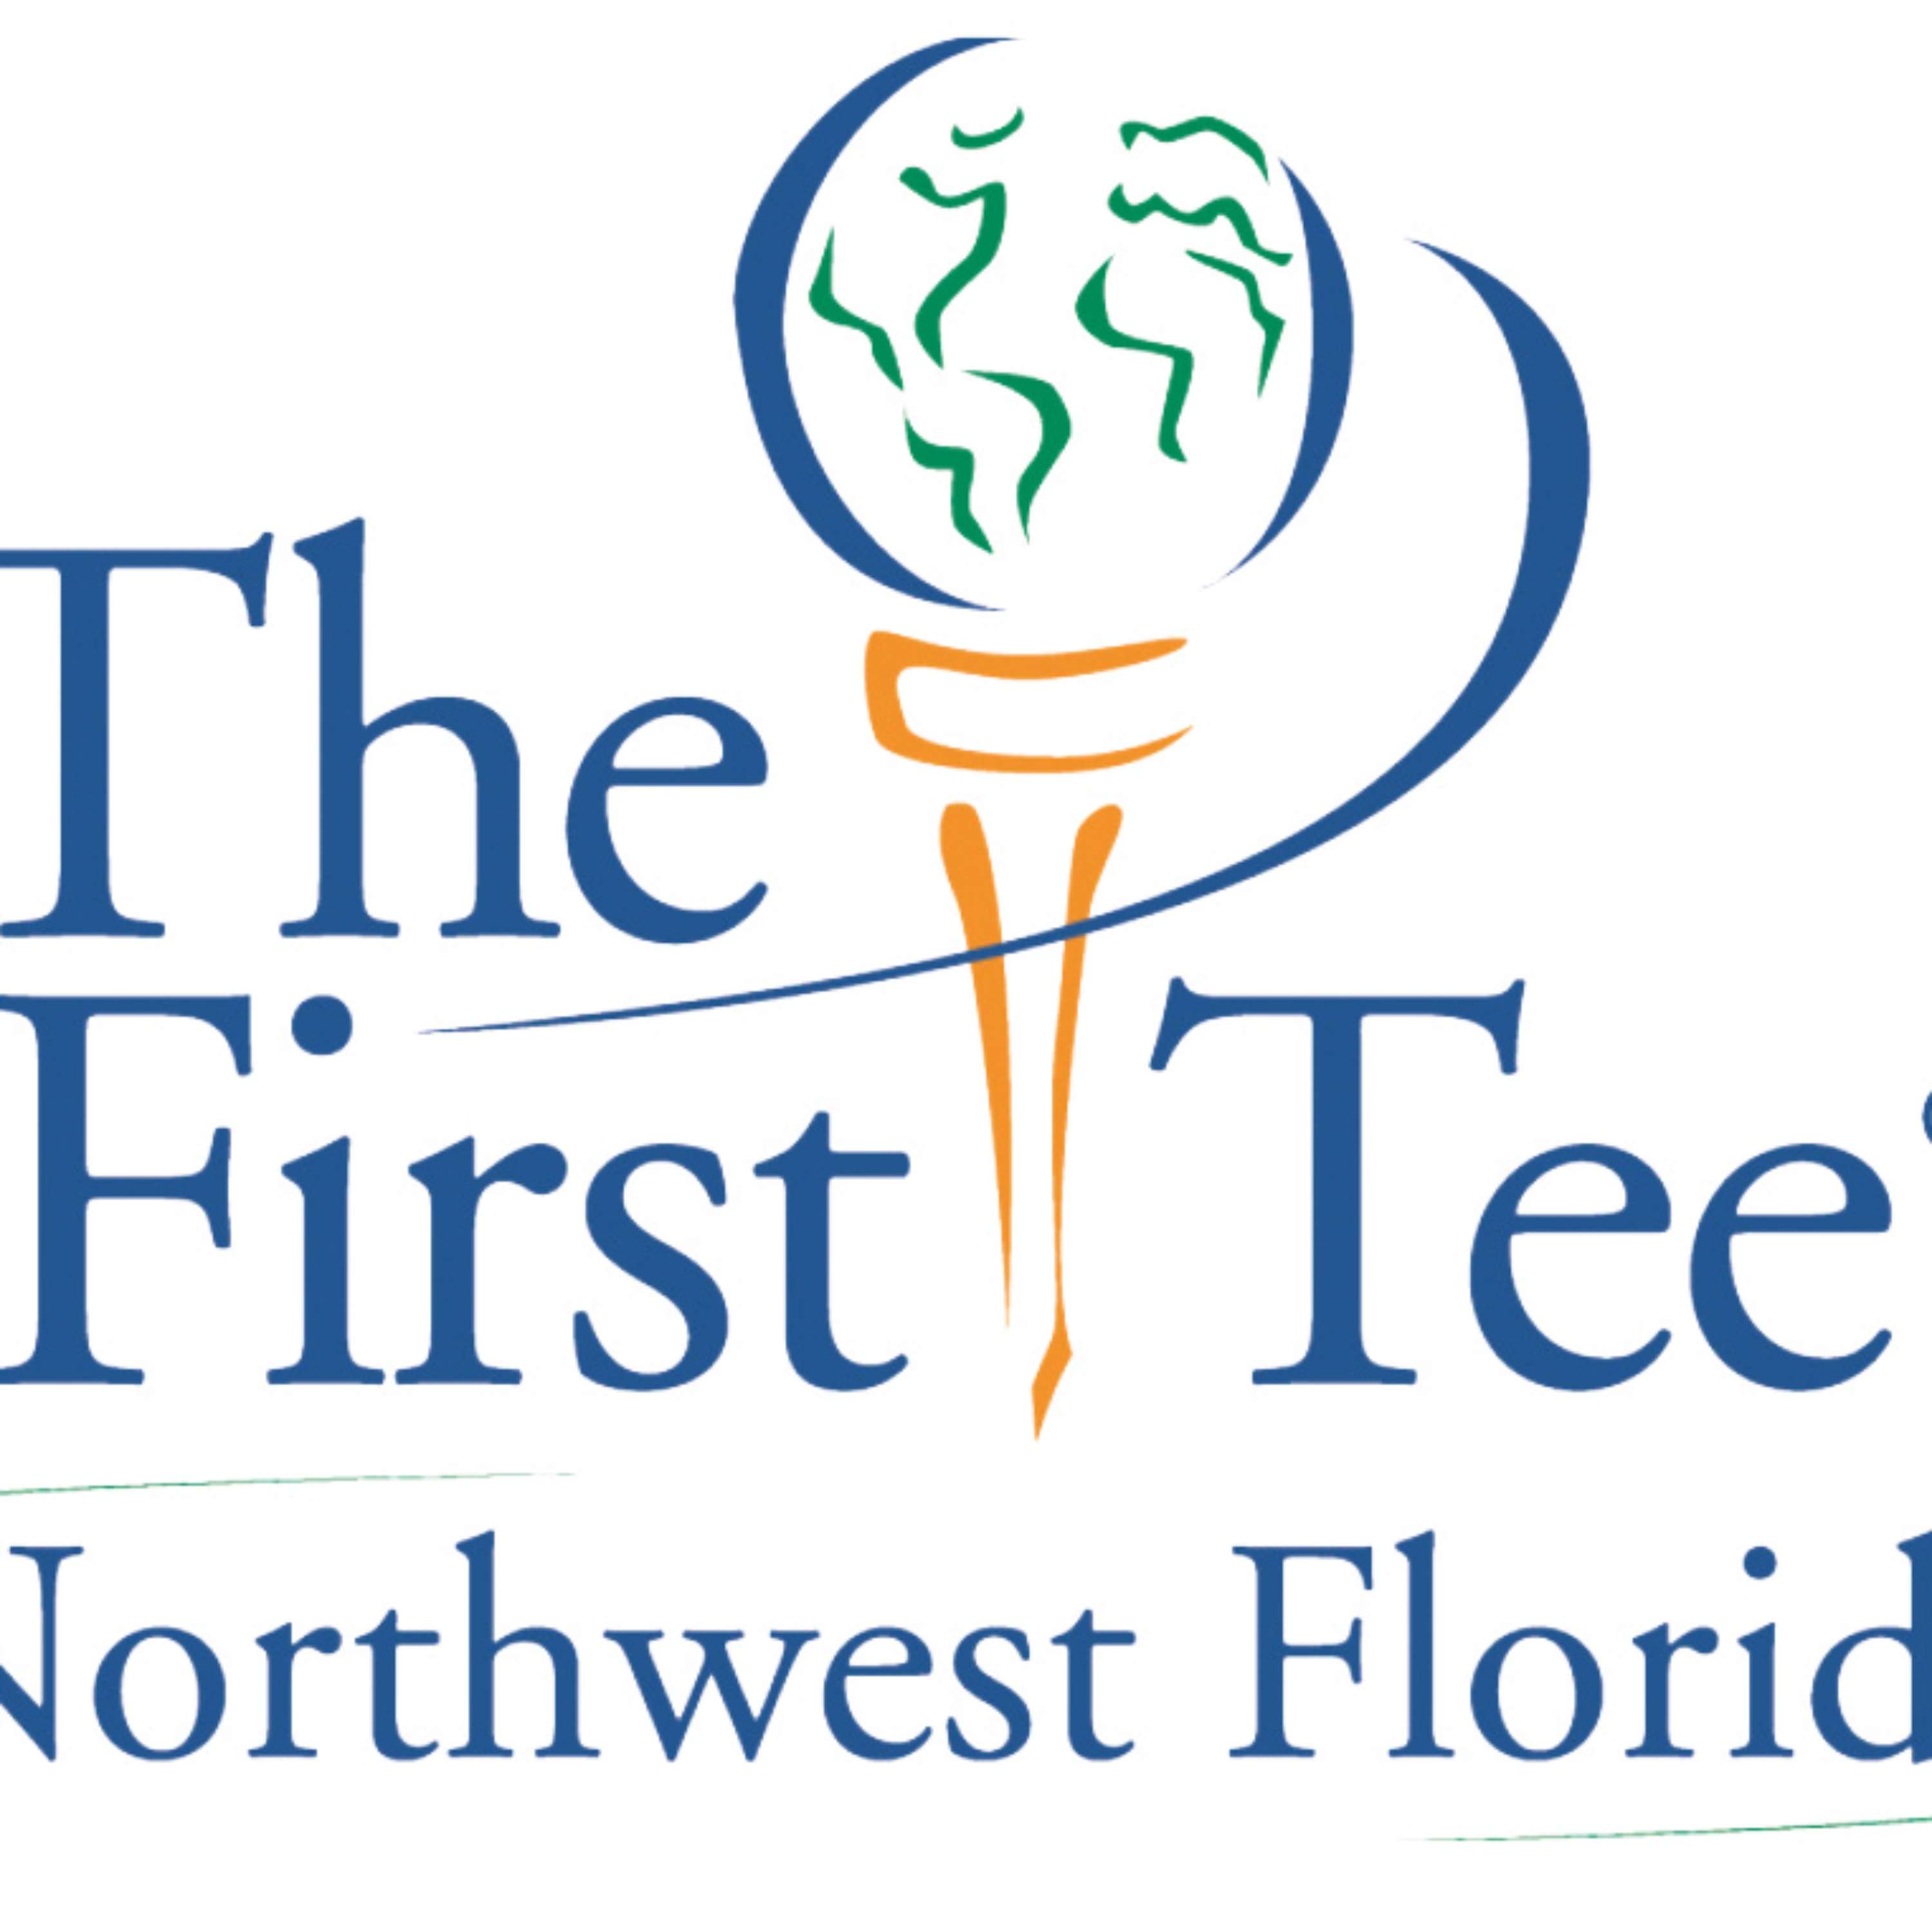 09/12/13 First Tee of NW FL with Marty Stanovich